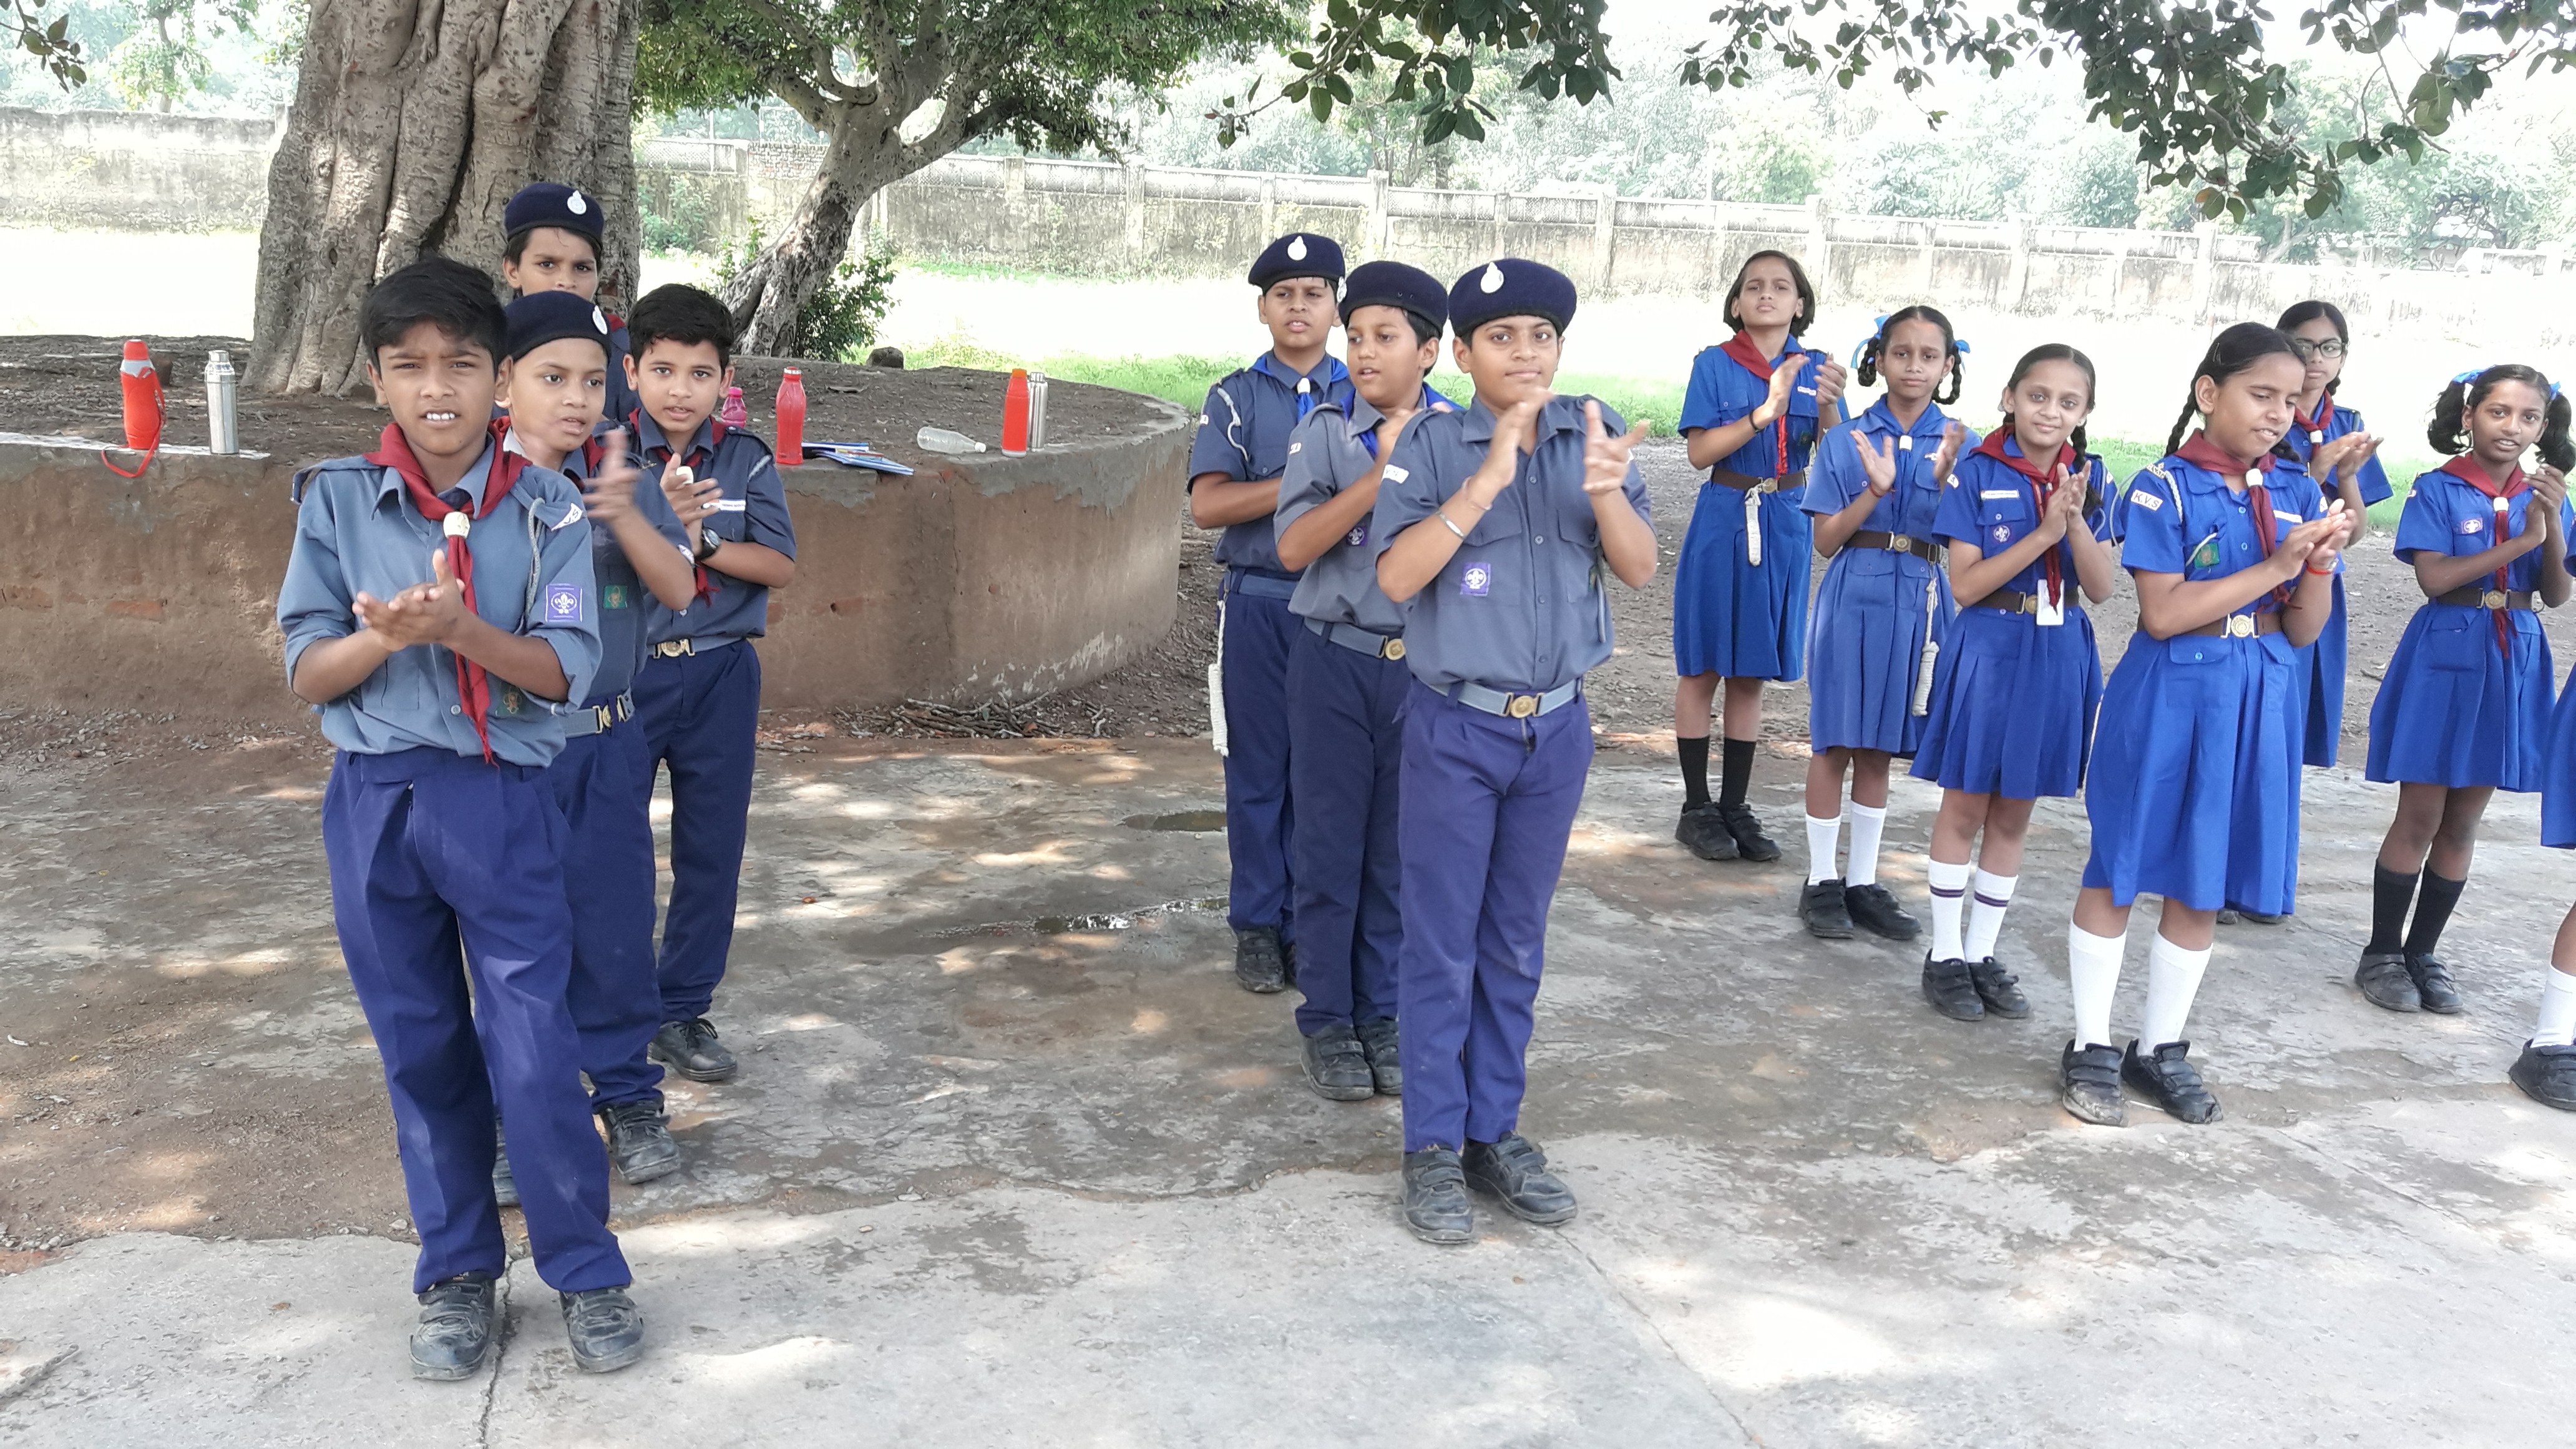 Image of The Bharat Scouts and Guides Dress-UK042765-Picxy